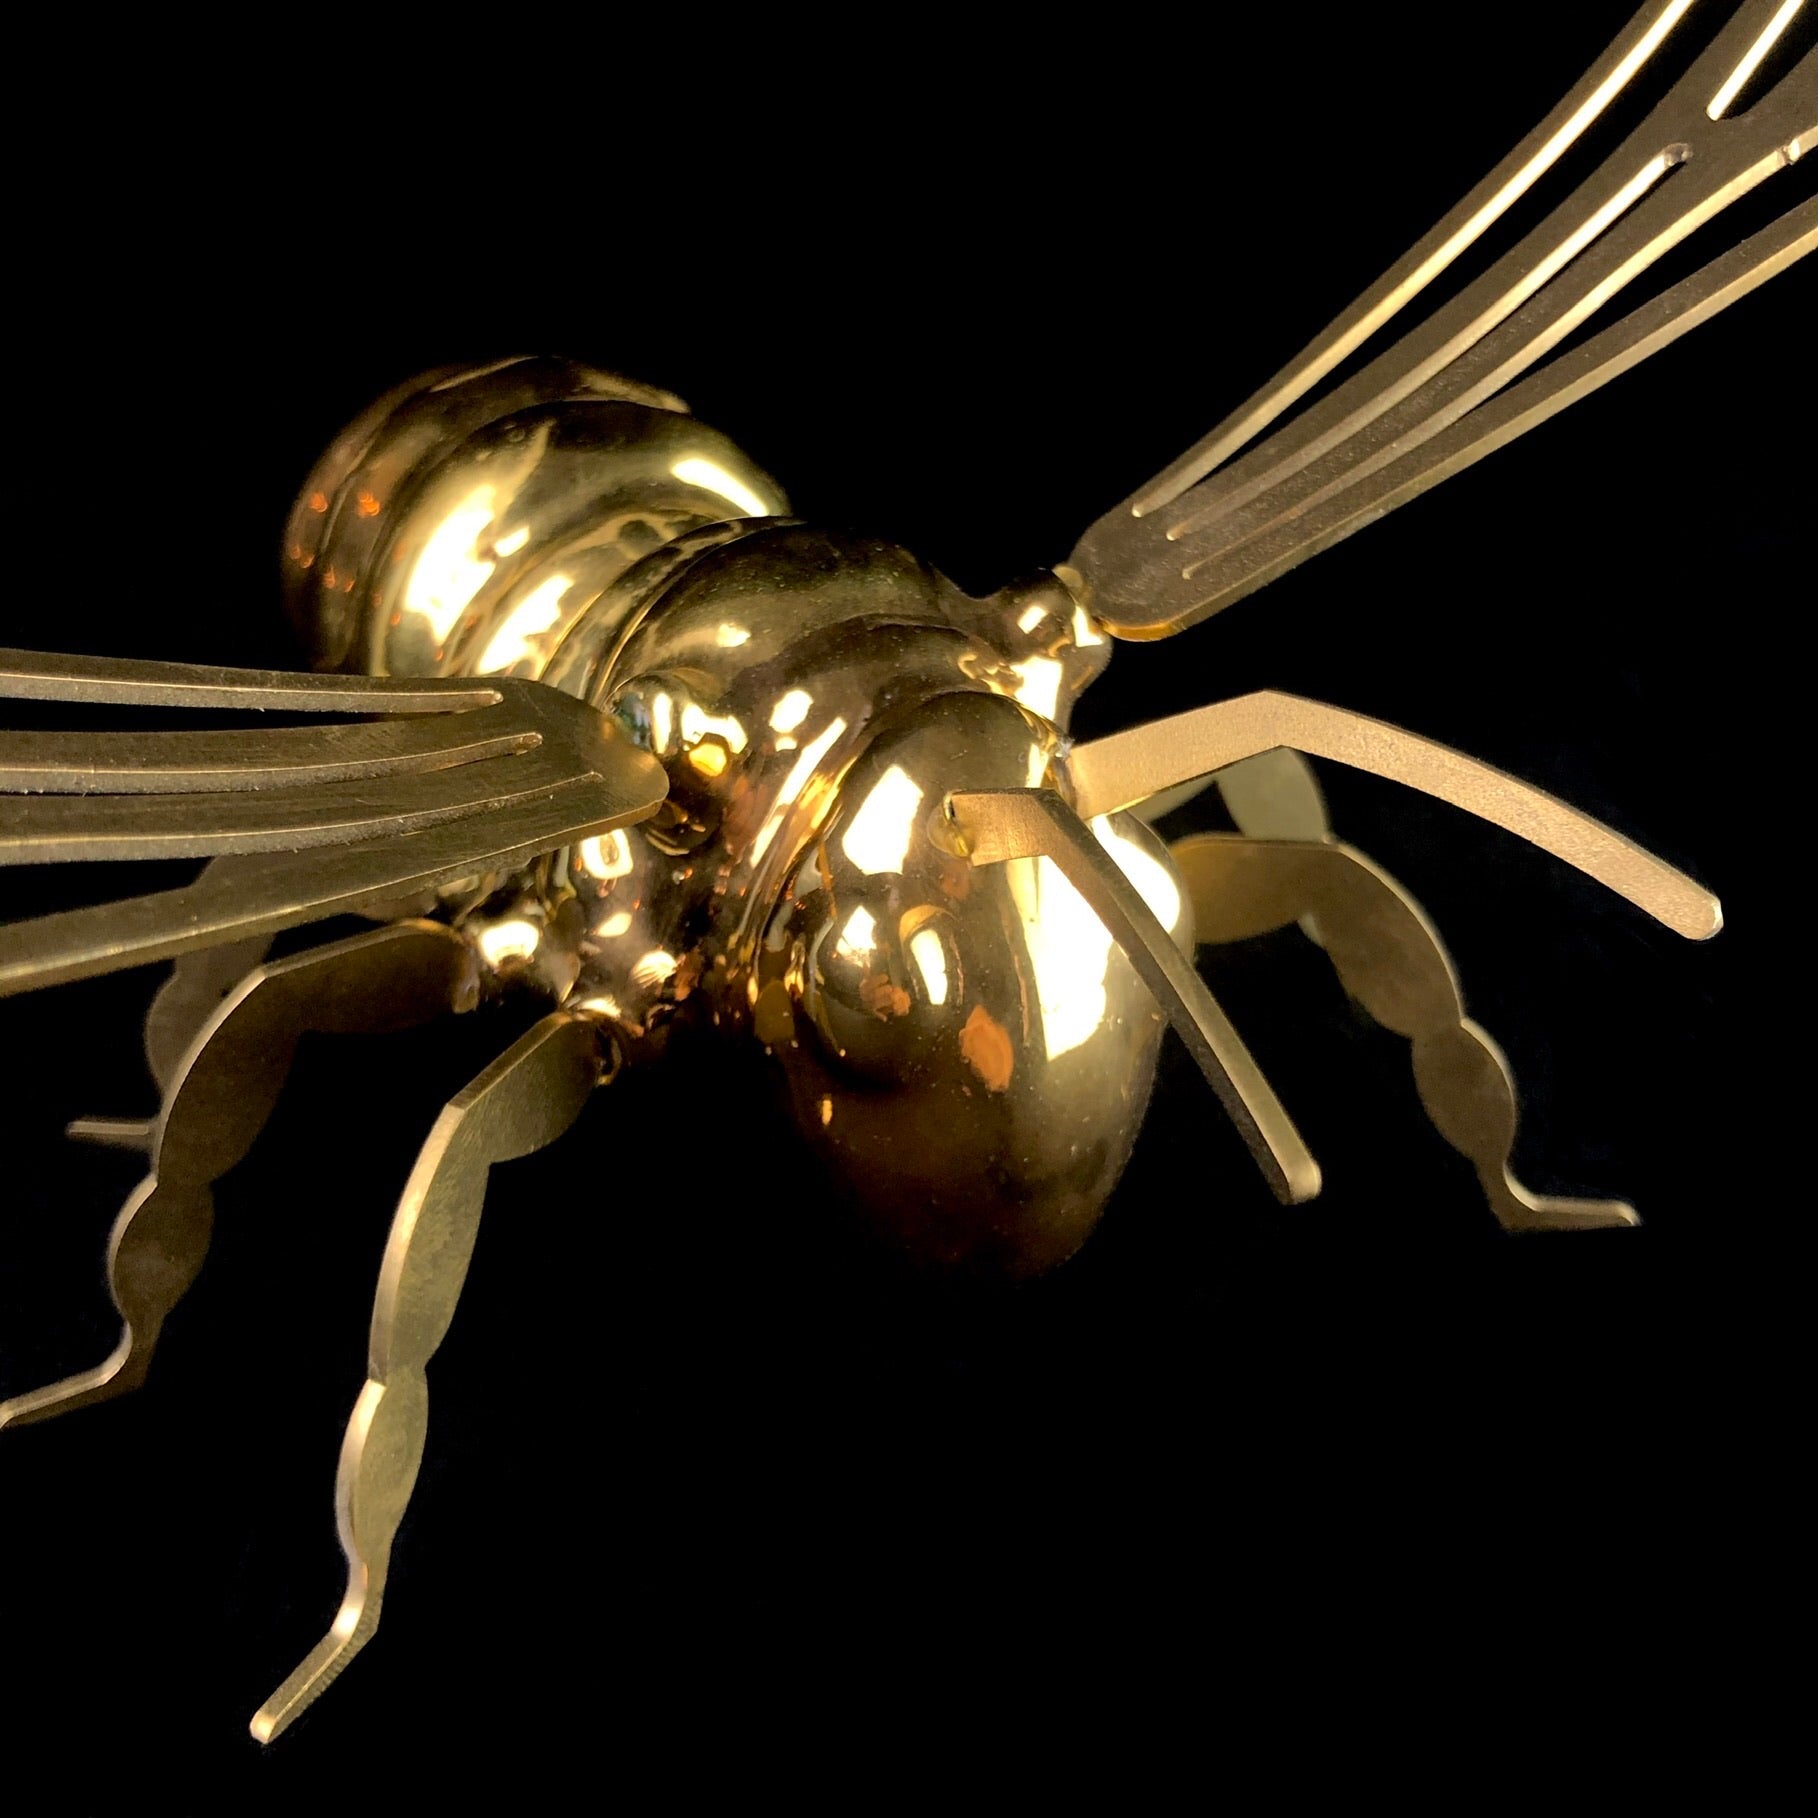 Antenna, legs and wing detail of Gold Wall Hanging Bee